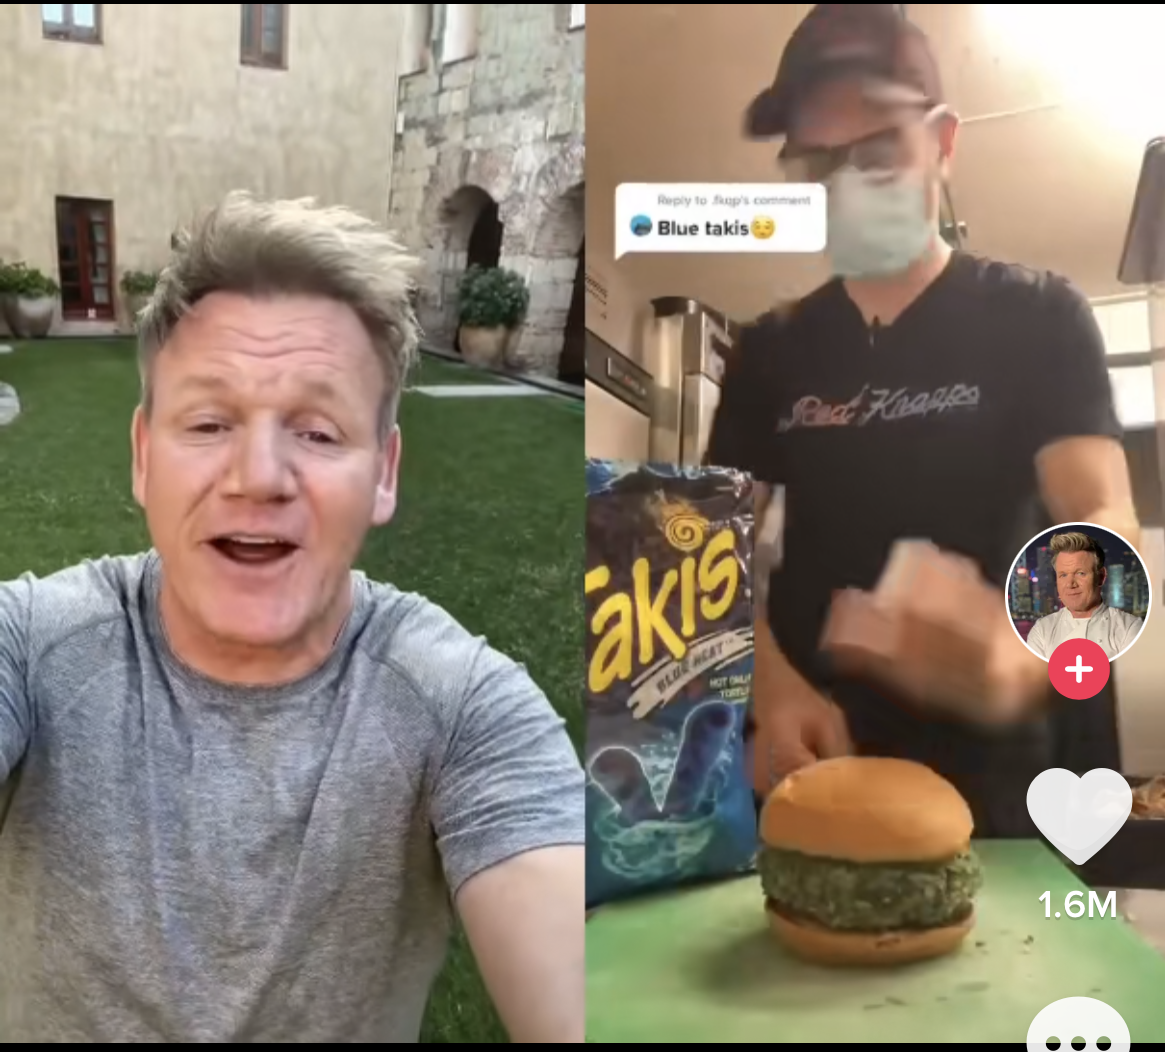 gordon ramsay reacted to a chef putting blue takis on and inside a burger